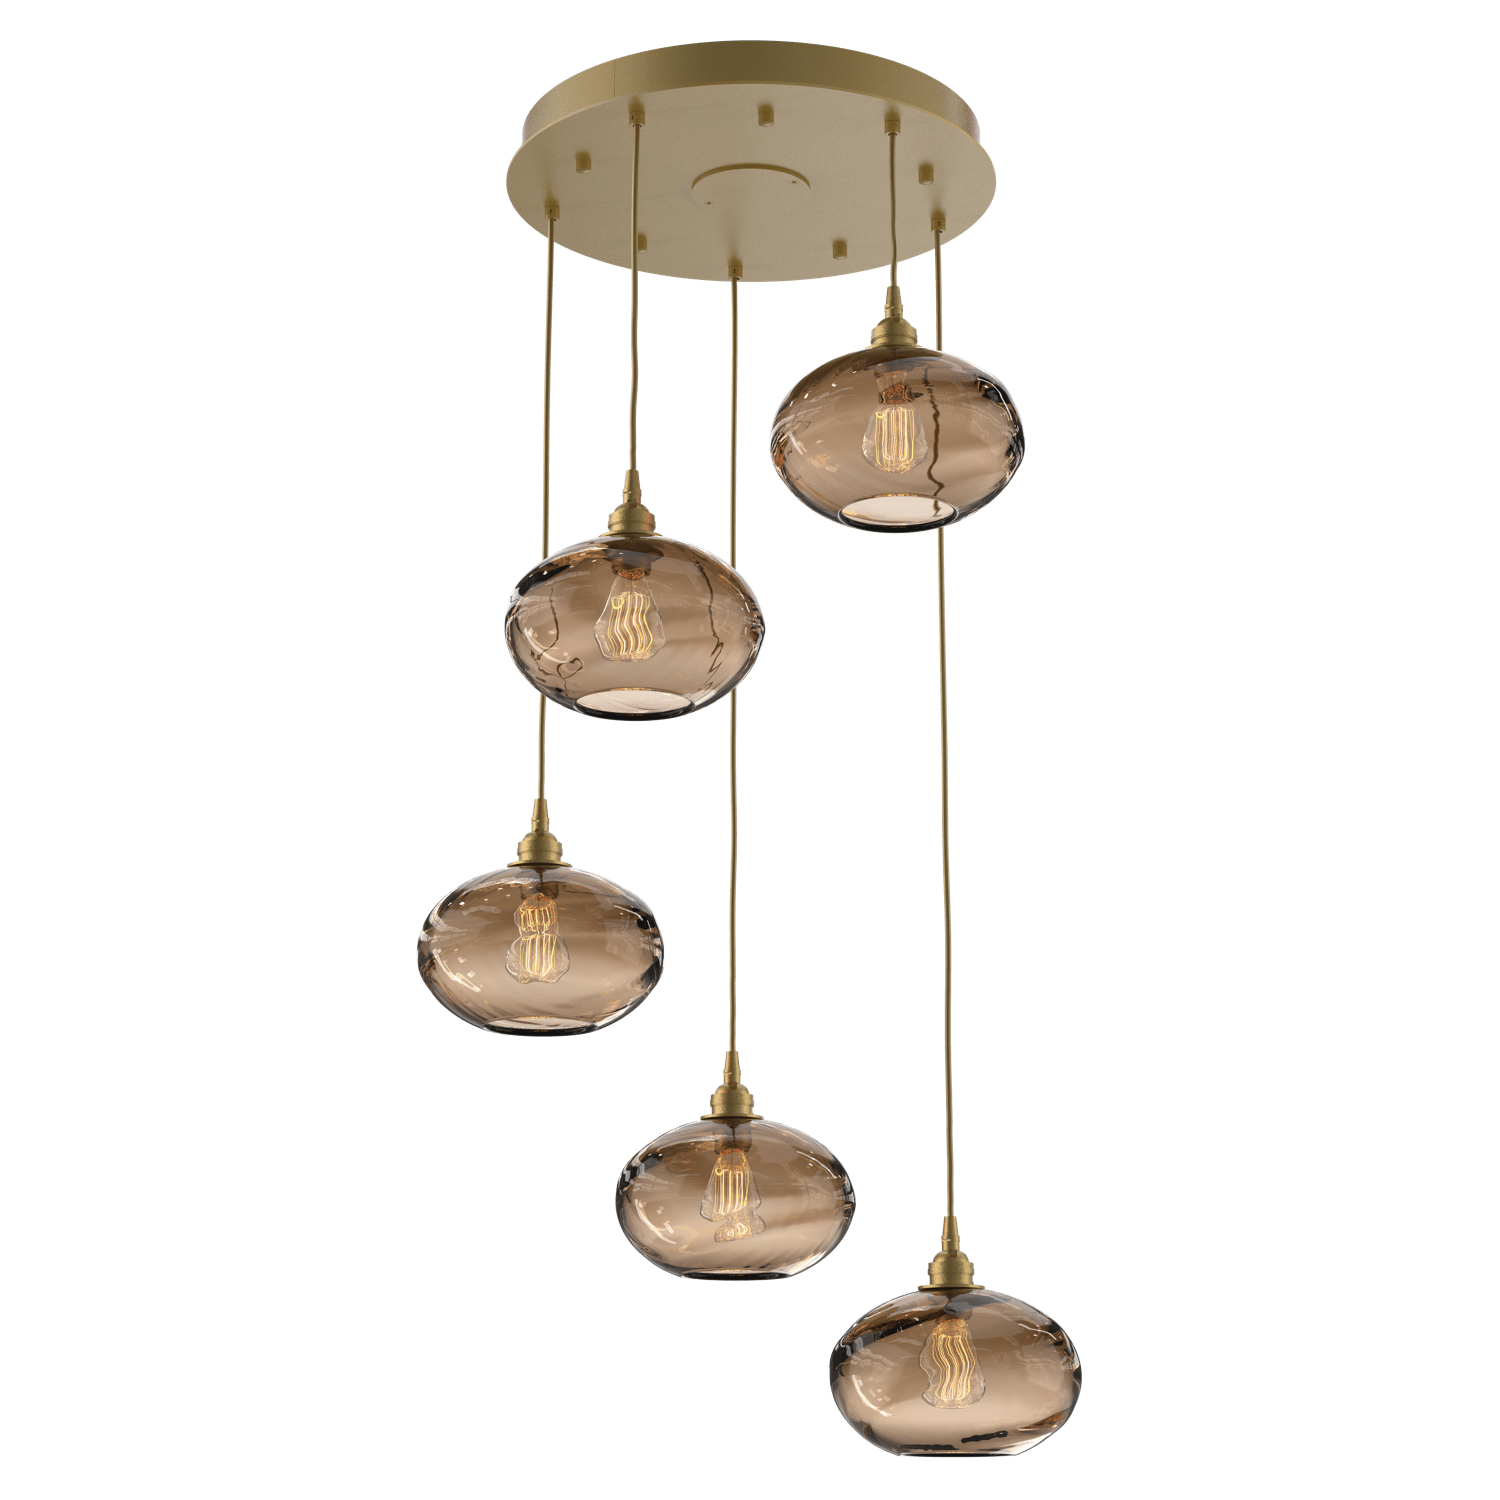 CHB0036-05-GB-OB-Hammerton-Studio-Optic-Blown-Glass-Coppa-5-light-round-pendant-chandelier-with-gilded-brass-finish-and-optic-bronze-blown-glass-shades-and-incandescent-lamping